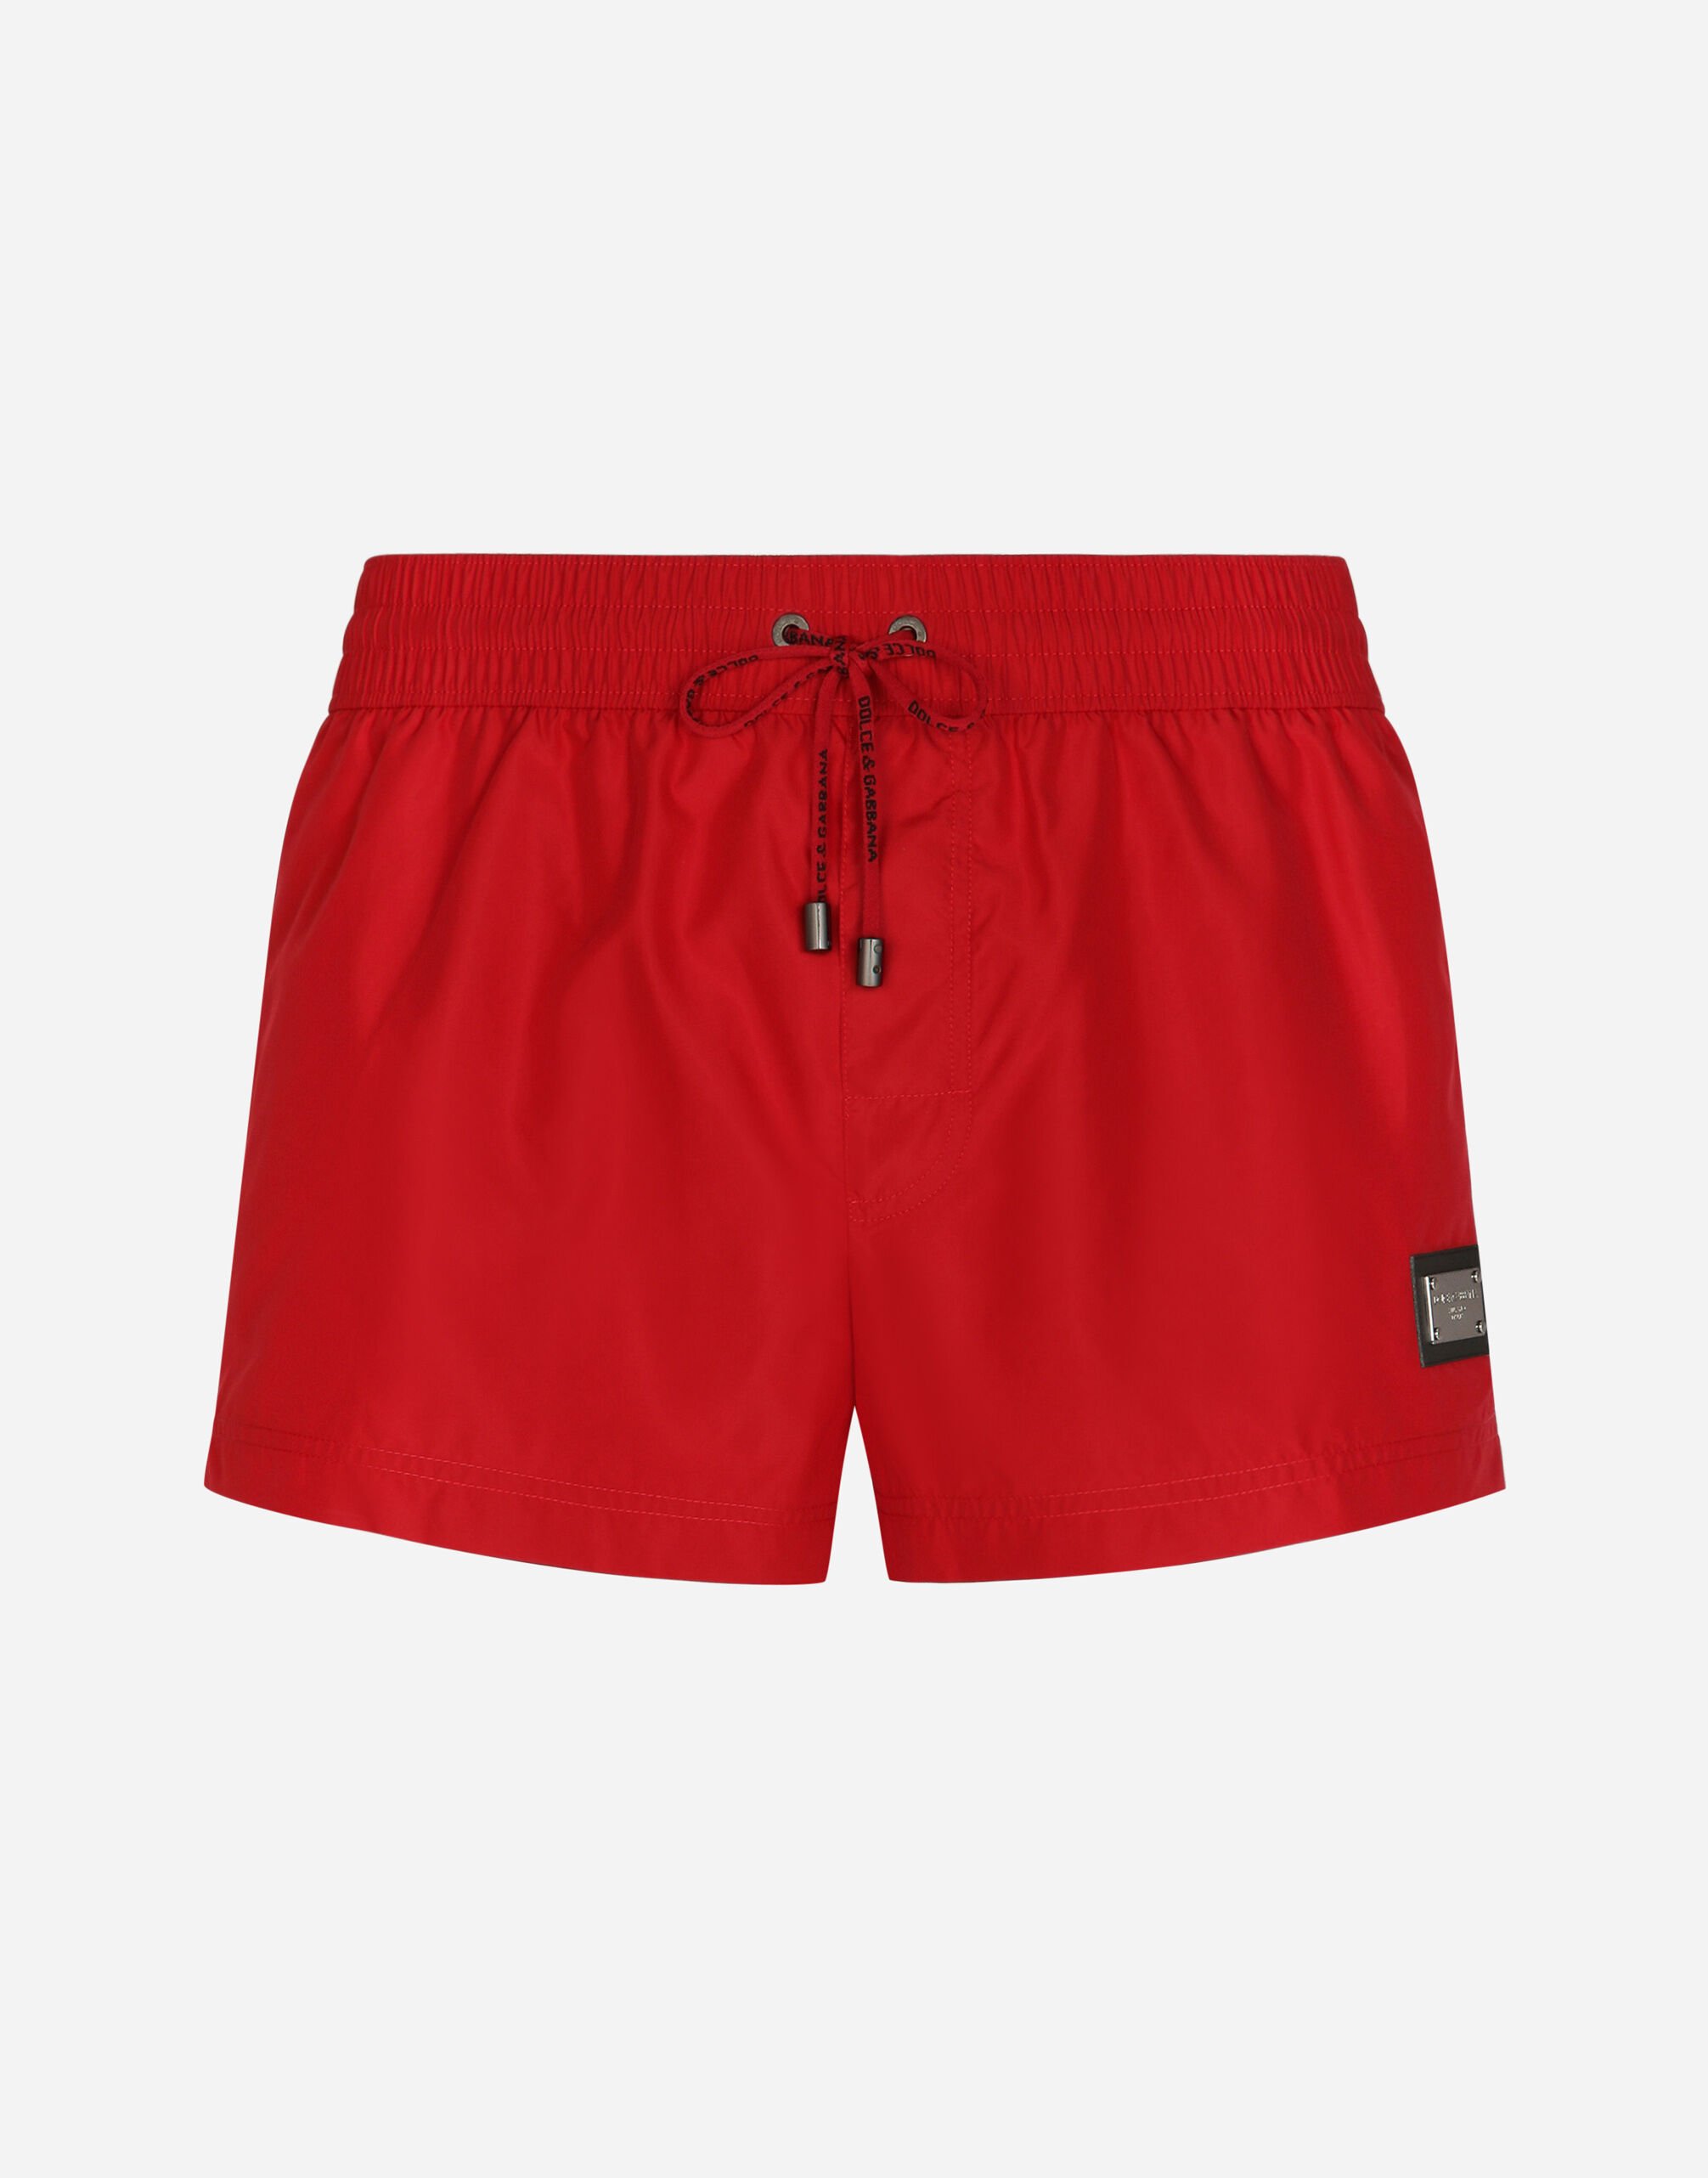 Dolce & Gabbana Short swim trunks with branded tag Print M4A13TISMHF